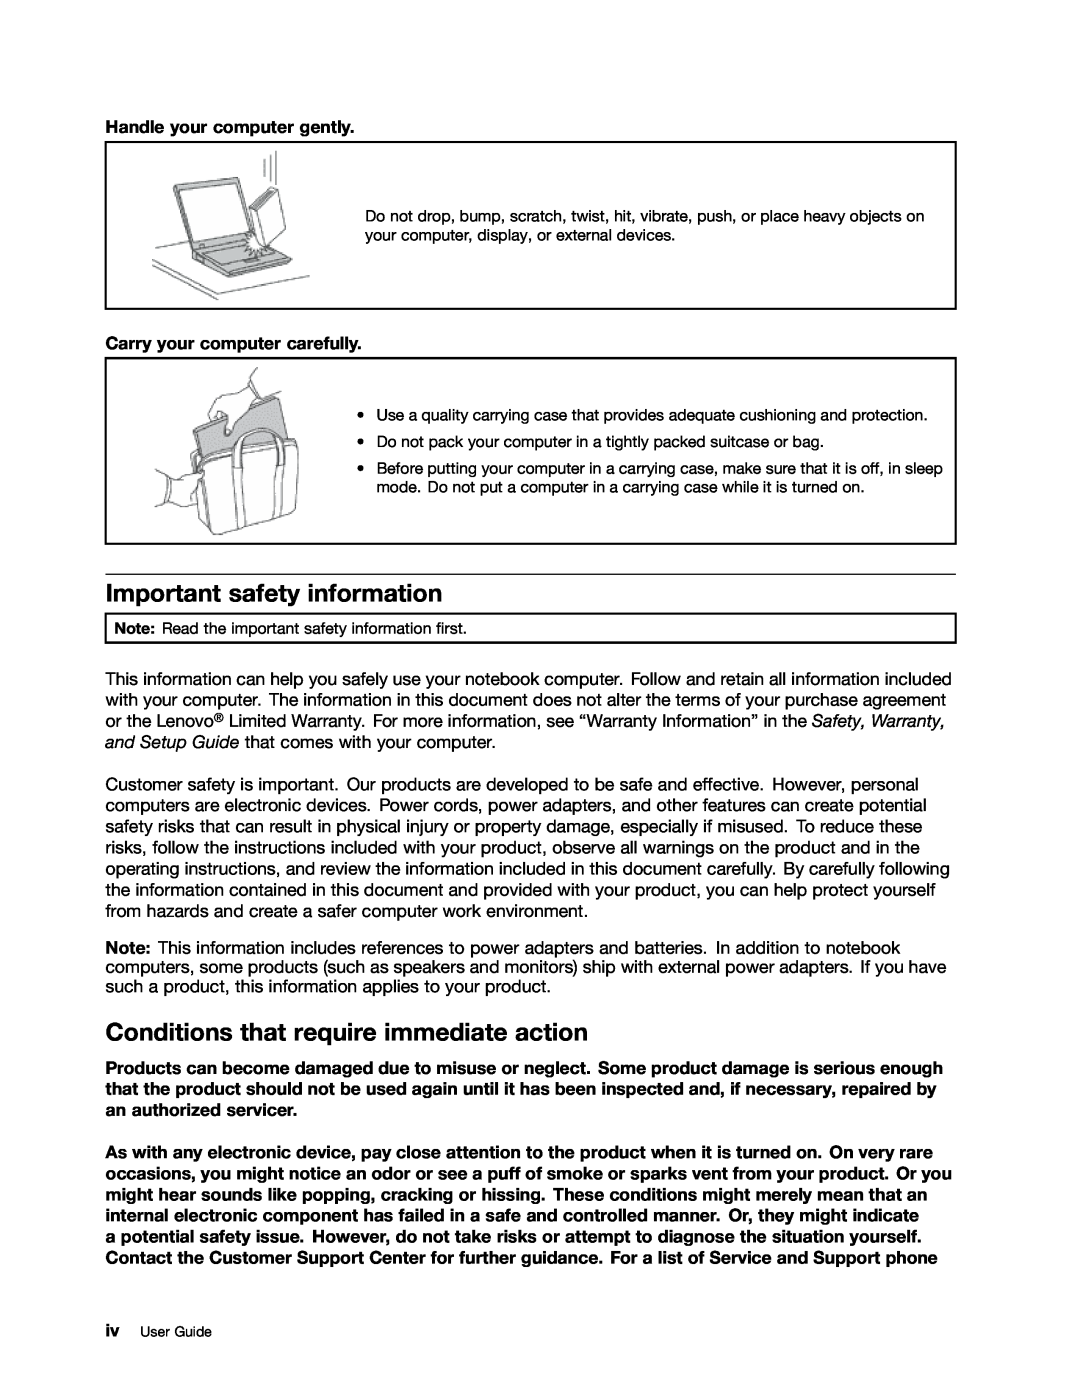 Lenovo 628323U manual Important safety information, Conditions that require immediate action, Handle your computer gently 